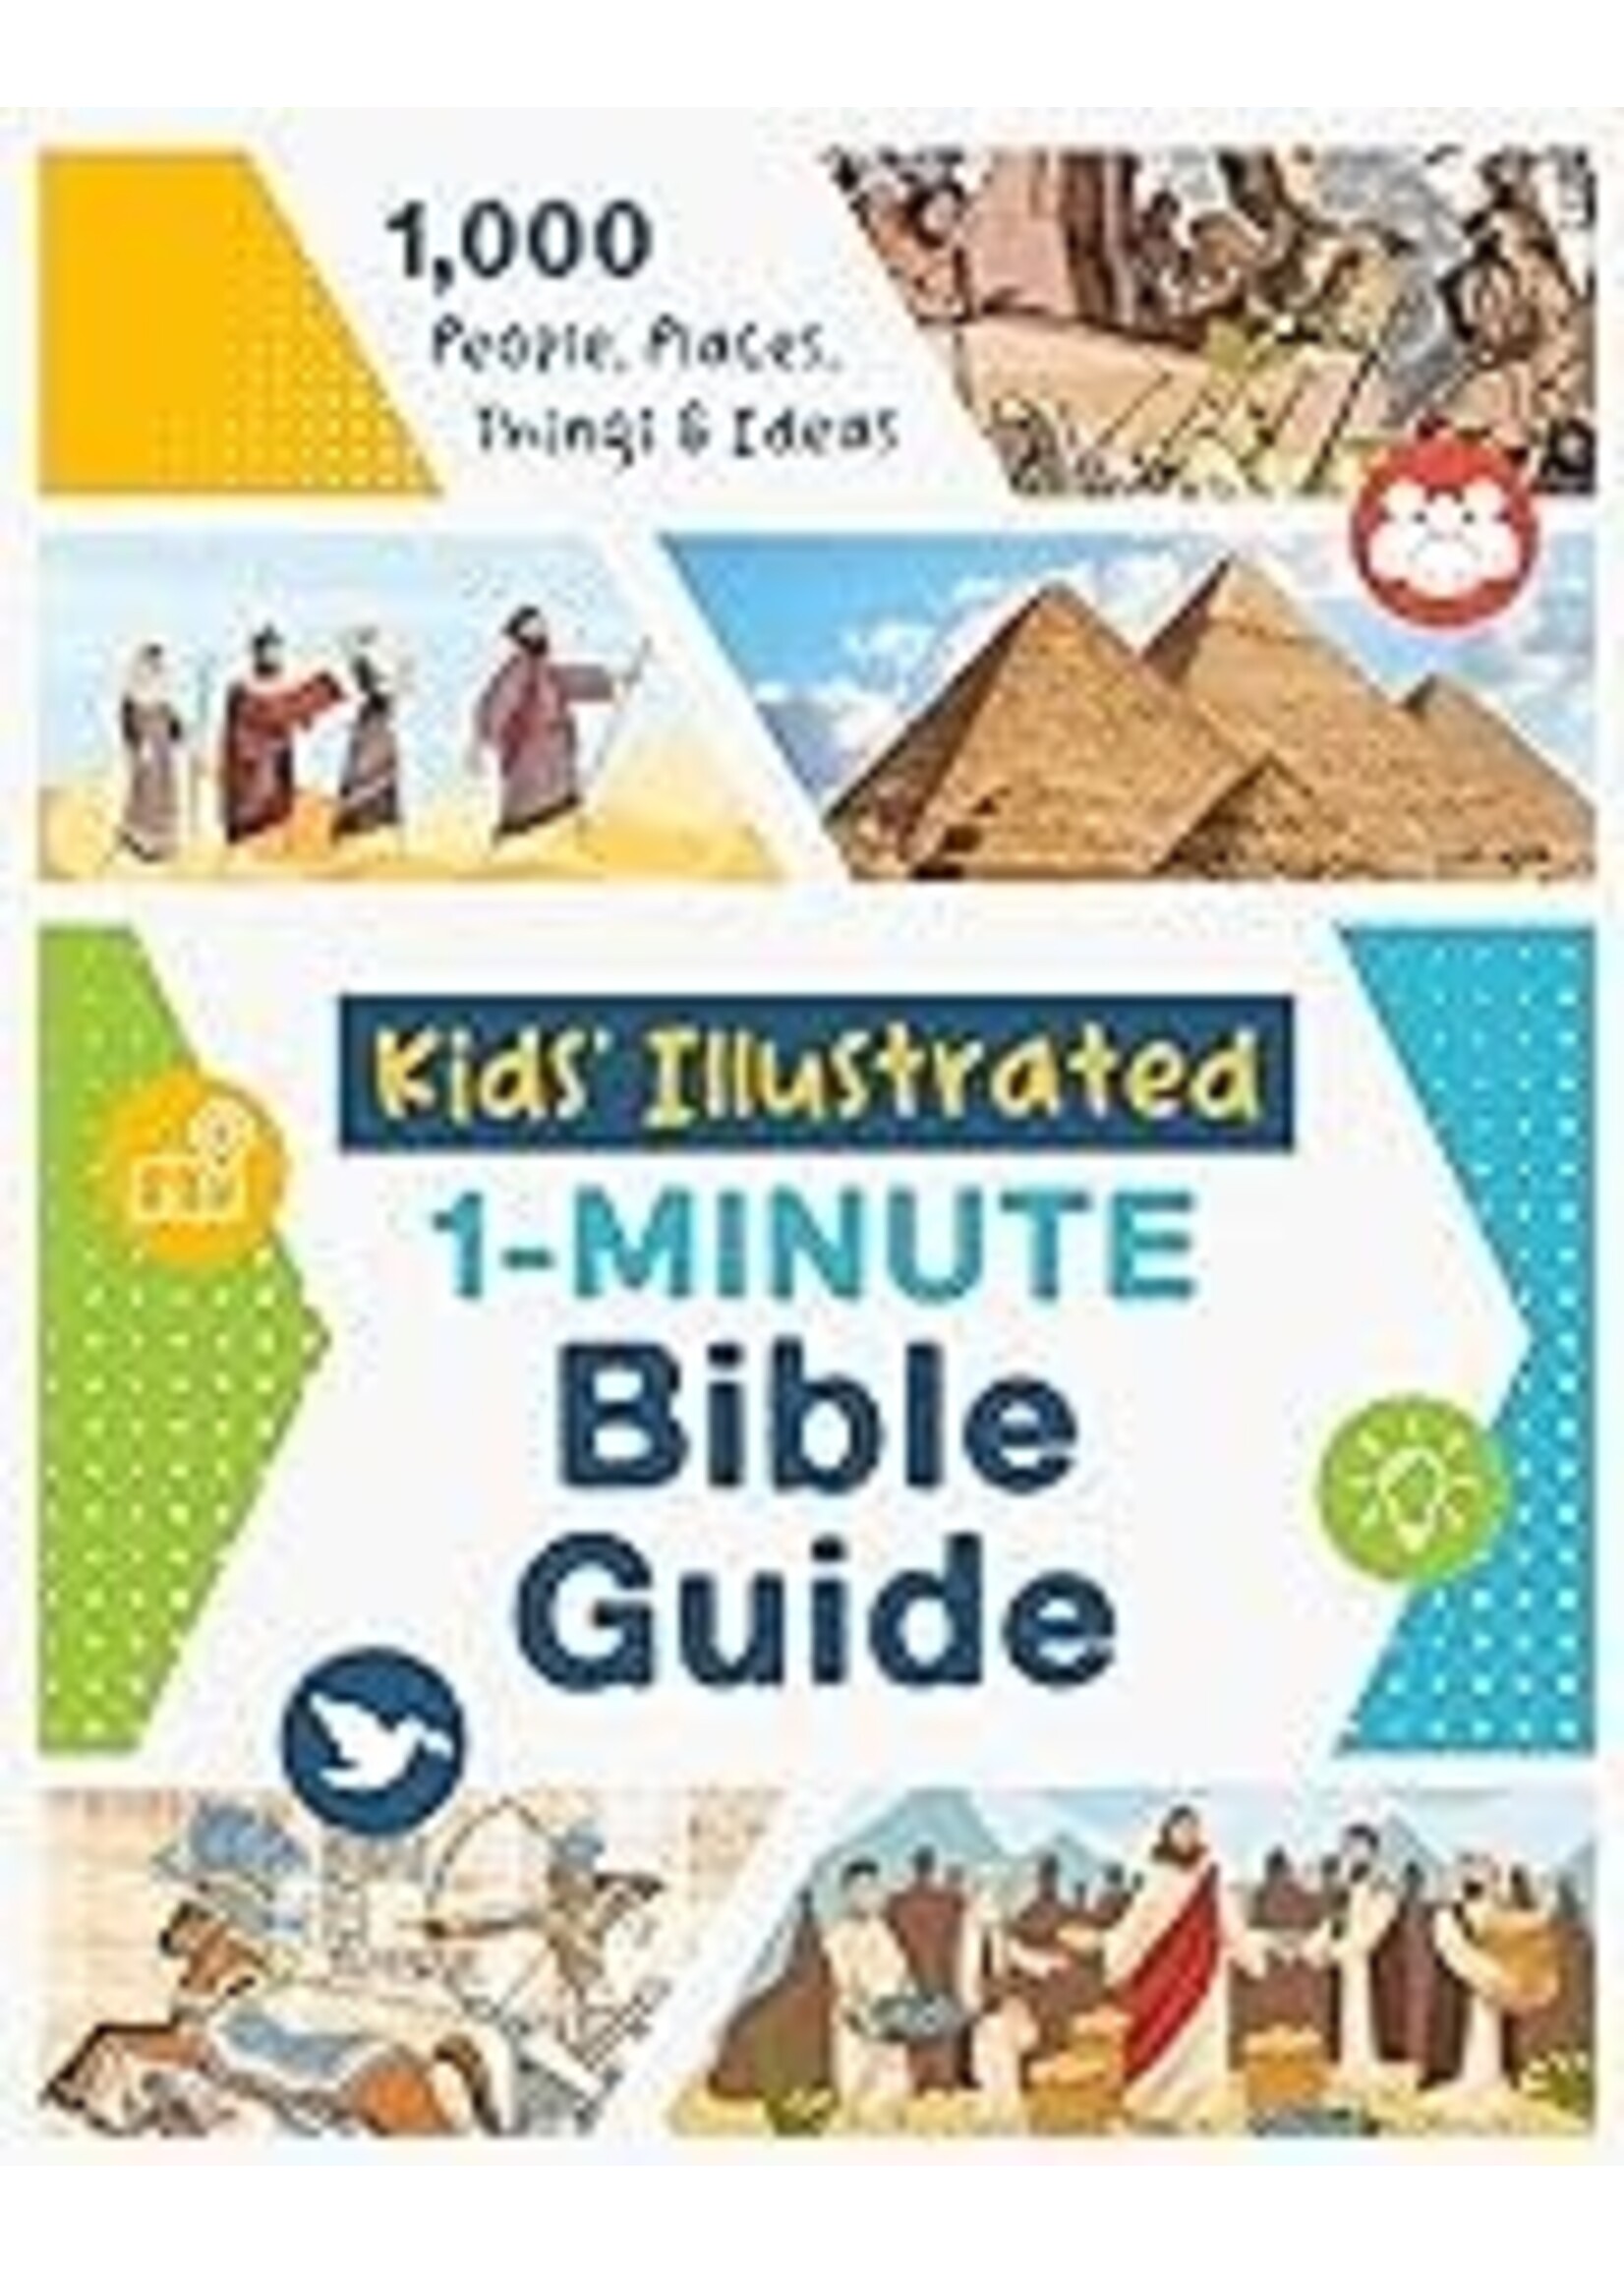 Kids' Illustrated 1-Minute Bible Guide